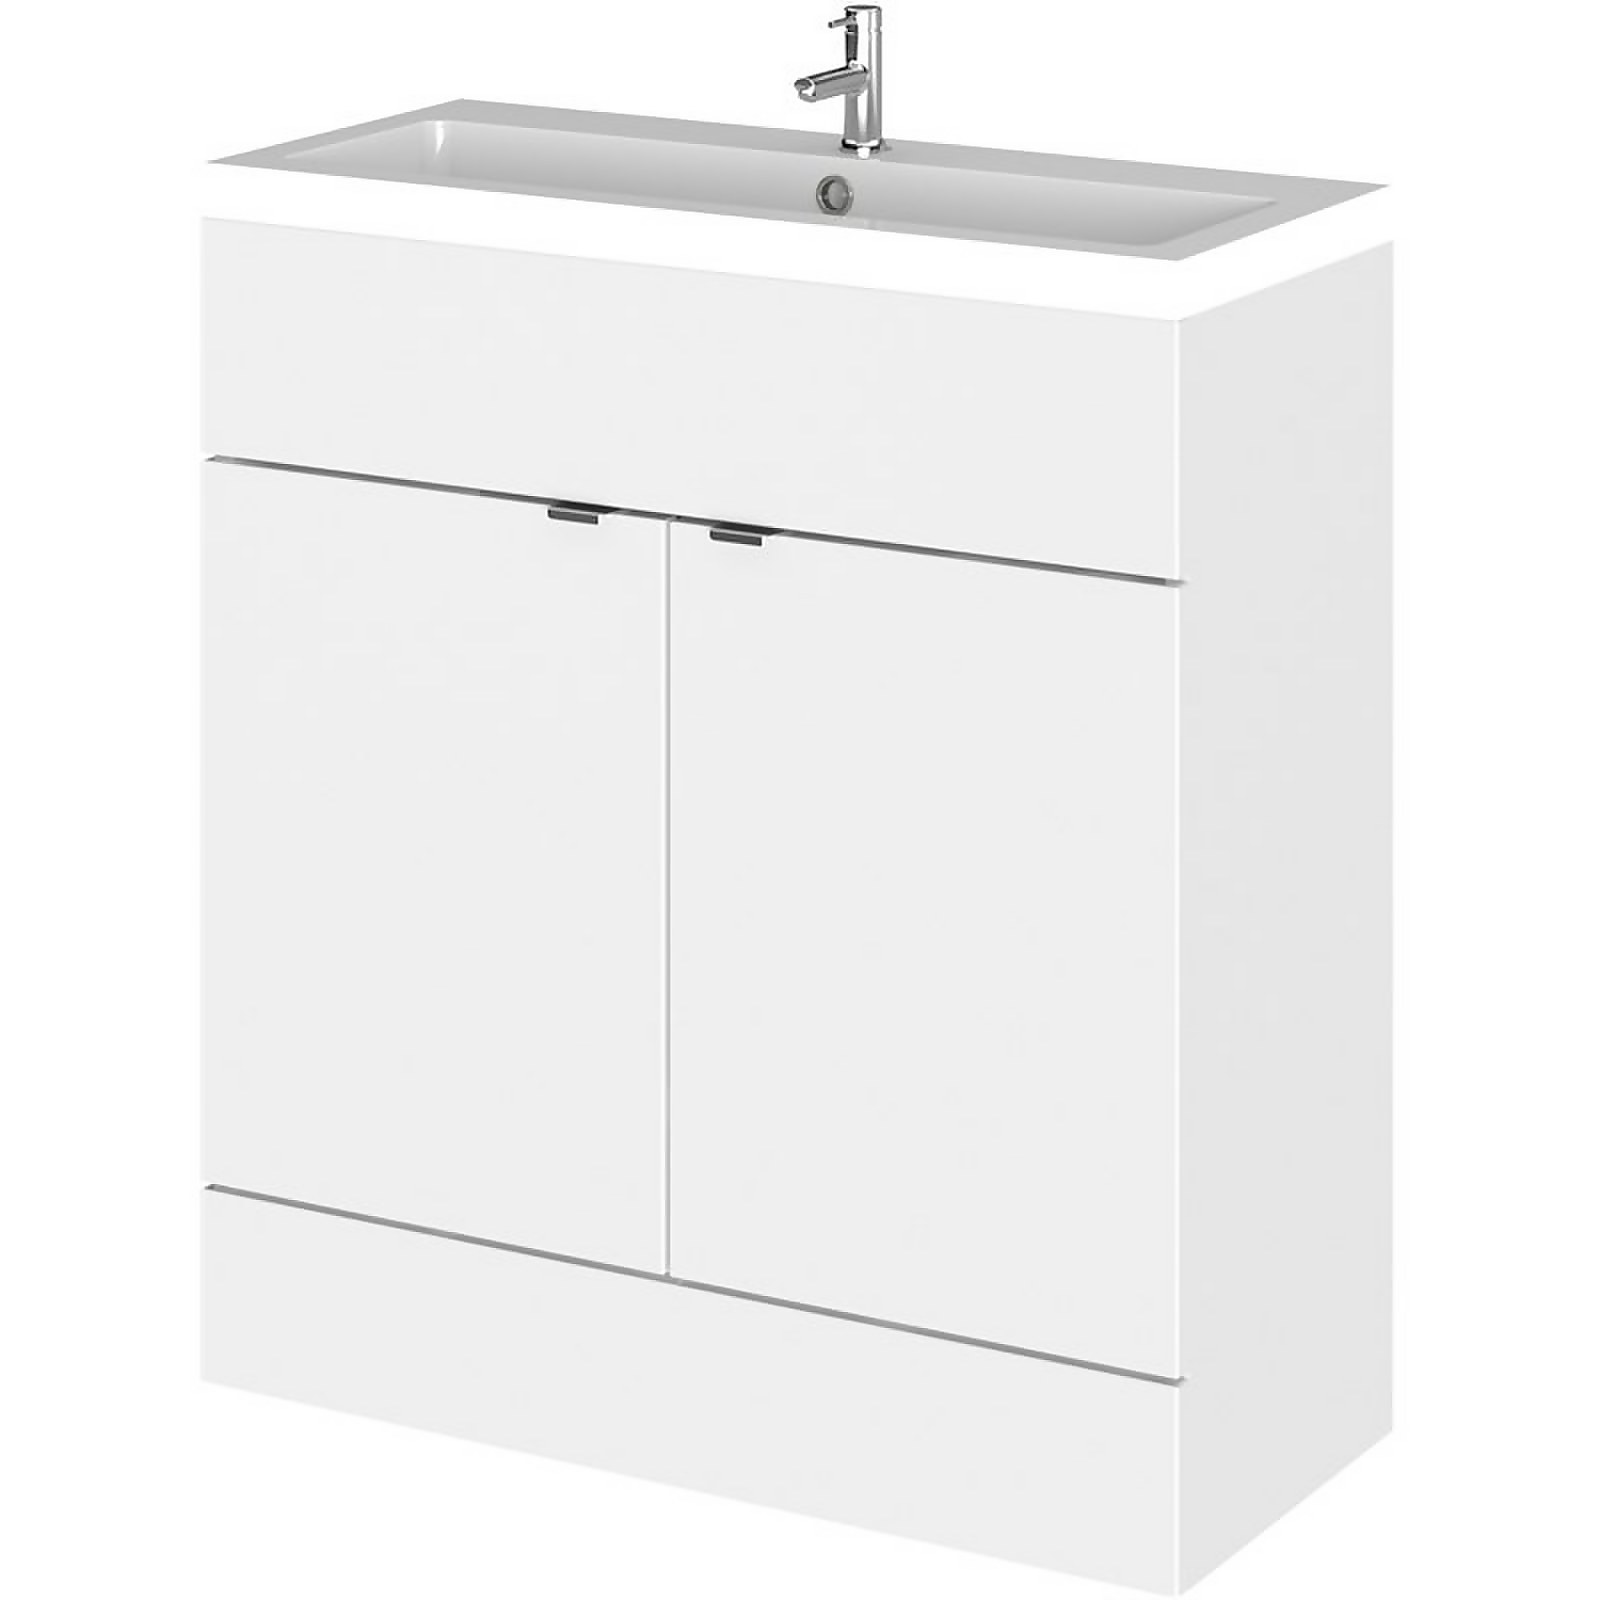 Photo of Balterley Dynamic 800mm Vanity Unit With Basin - Gloss White